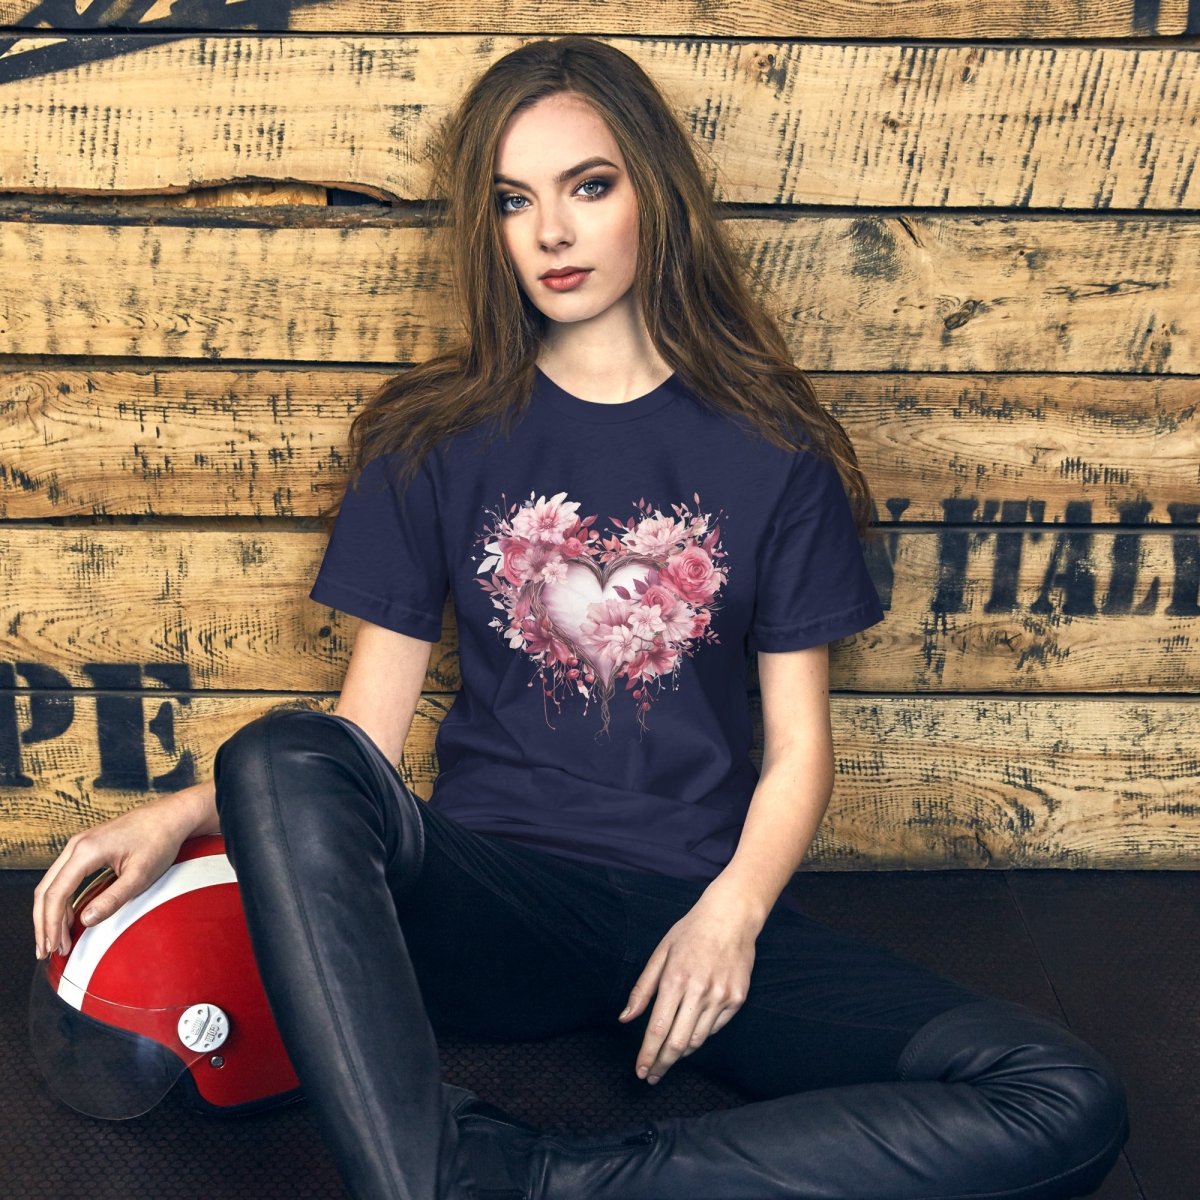 Flower Heart T-Shirt High Quality Floral Heart Valentines Day Shirt Love Gift for Her Love Tee Anniversary Shirt Cute Heart Tee Love Shirt - Everything Pixel